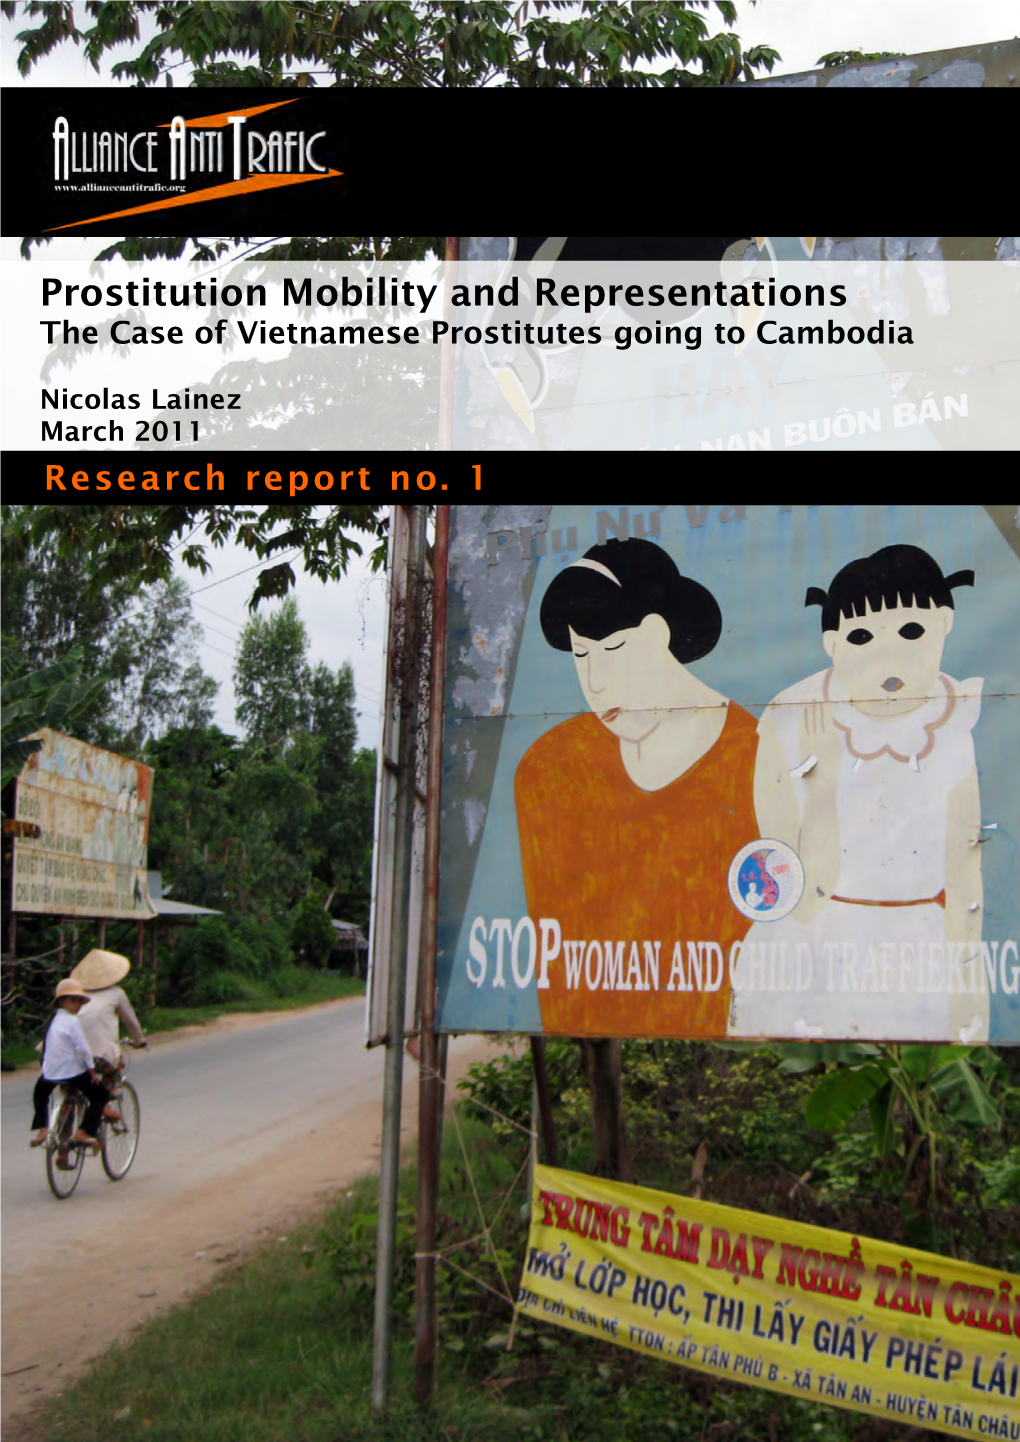 Prostitution Mobility and Representations